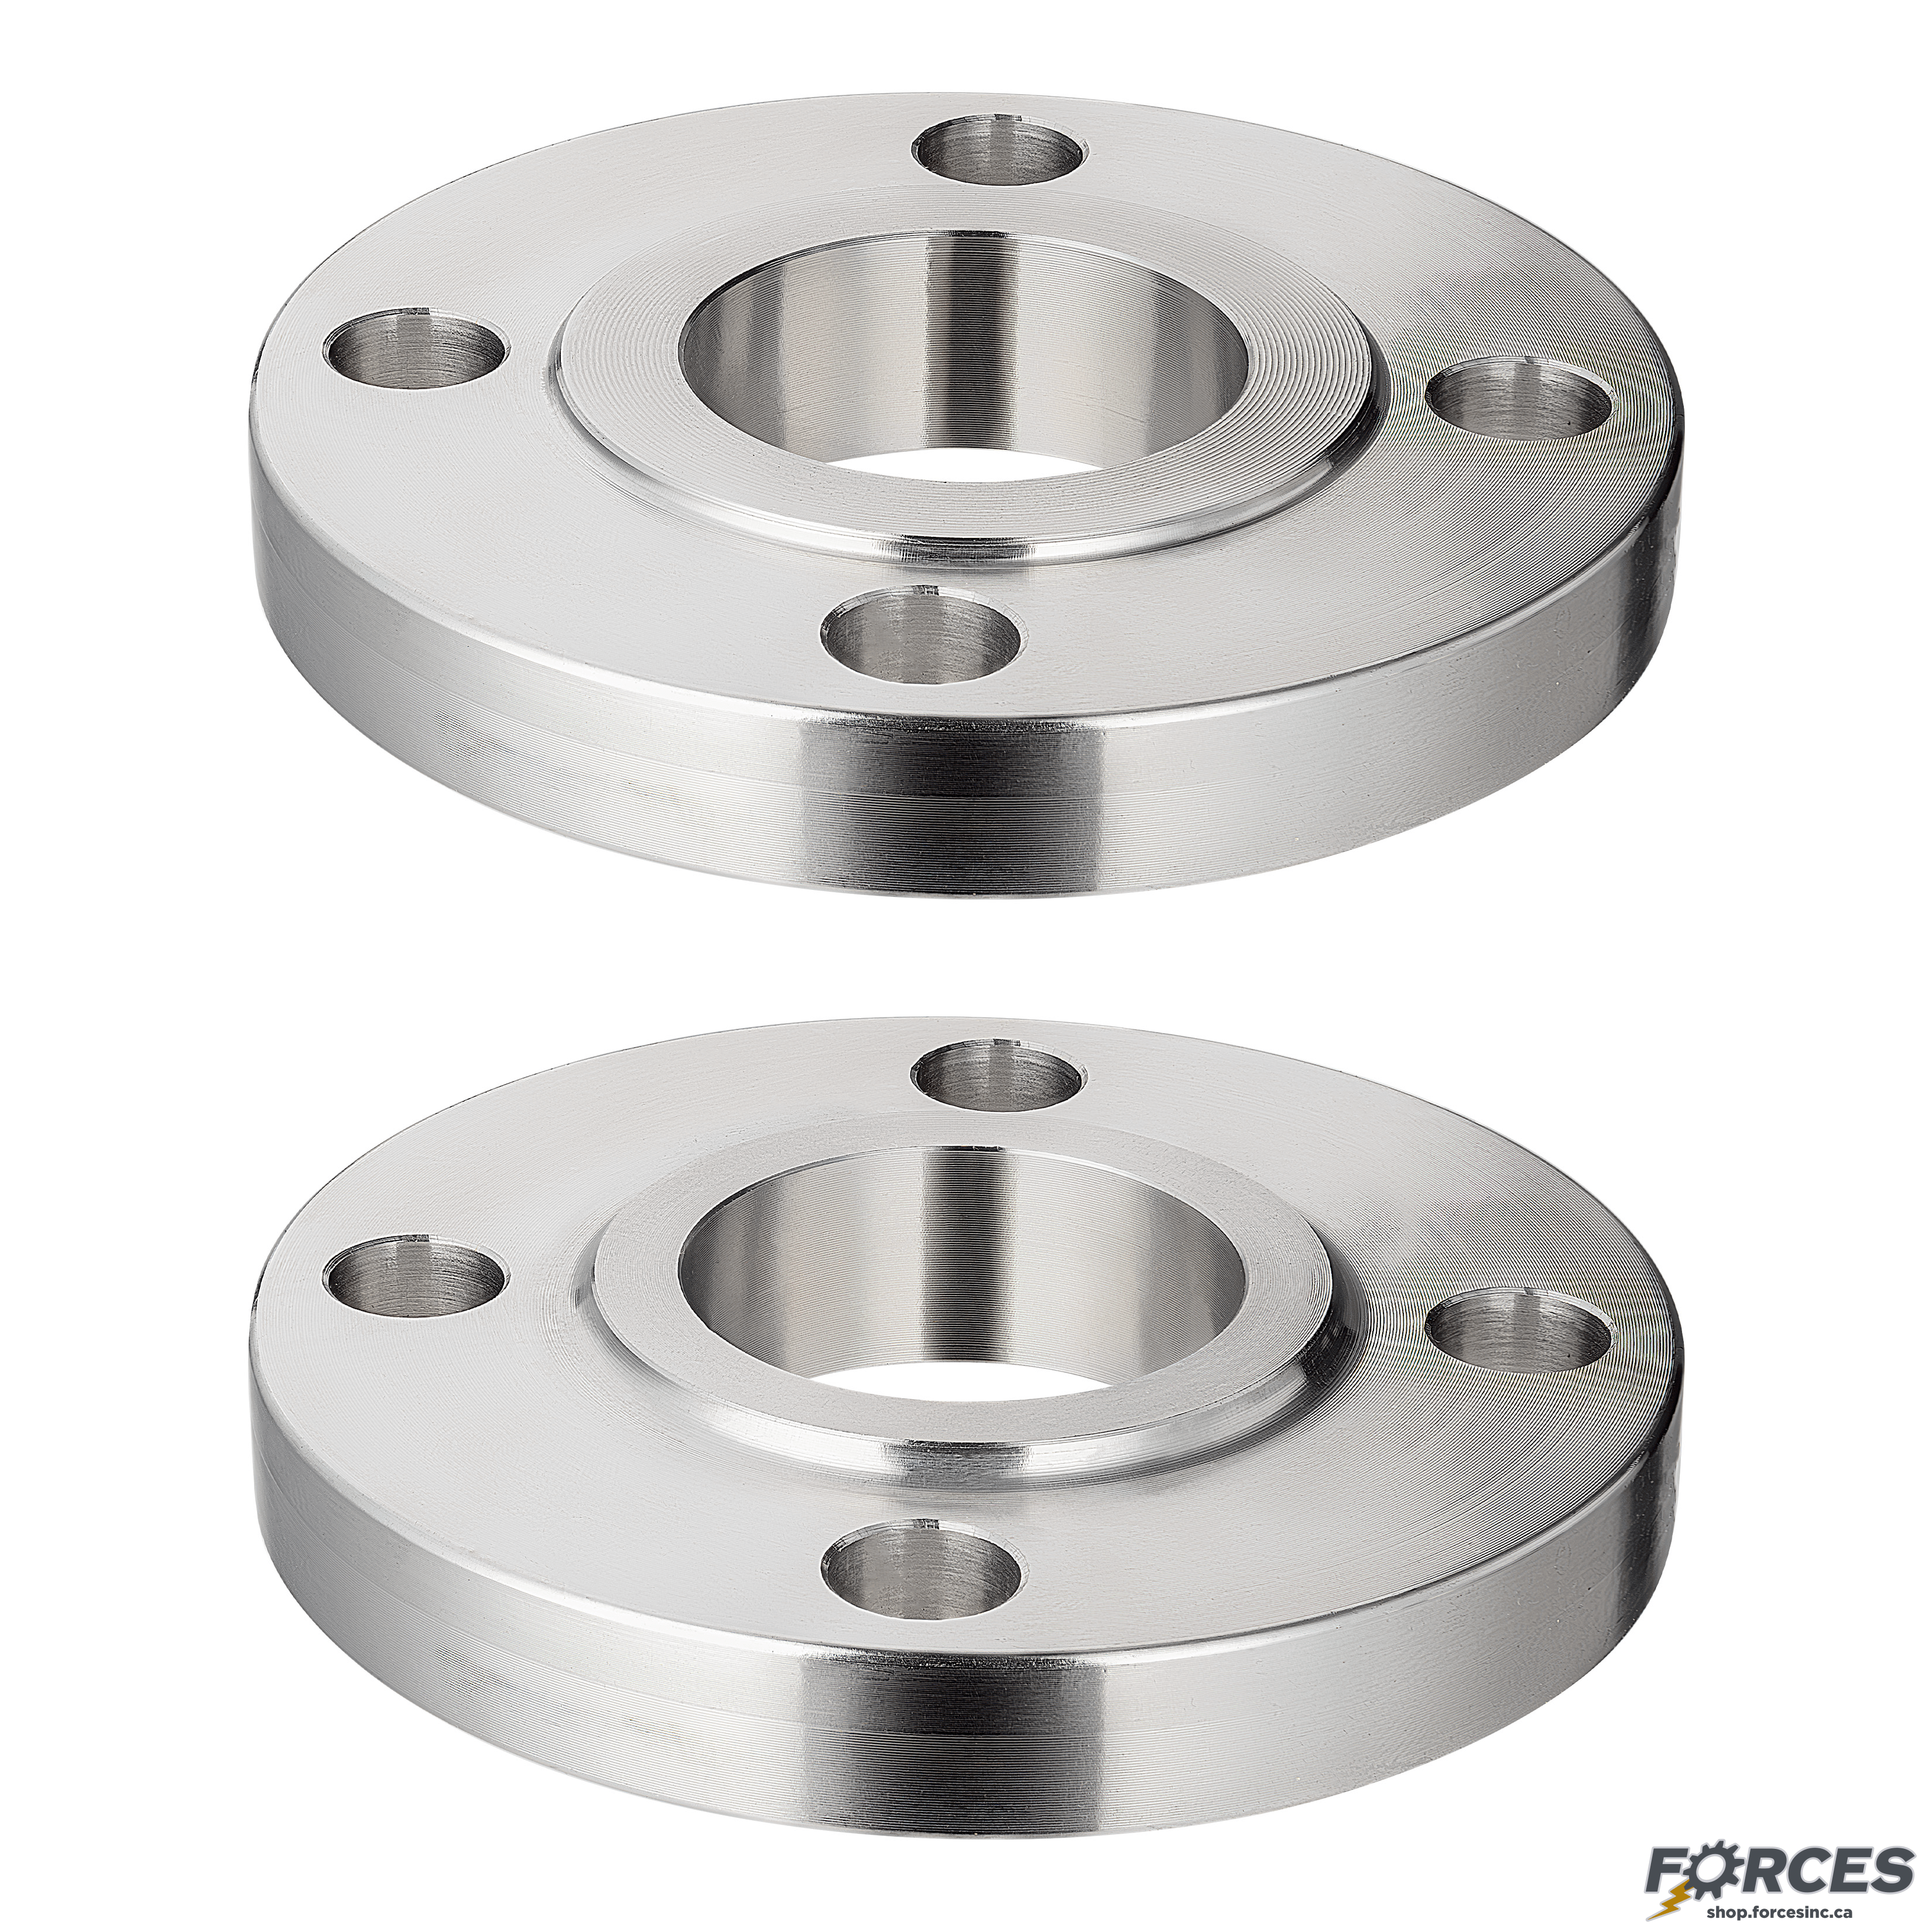 1" Slip-On Flange Class #150 - Stainless Steel 304 - Forces Inc